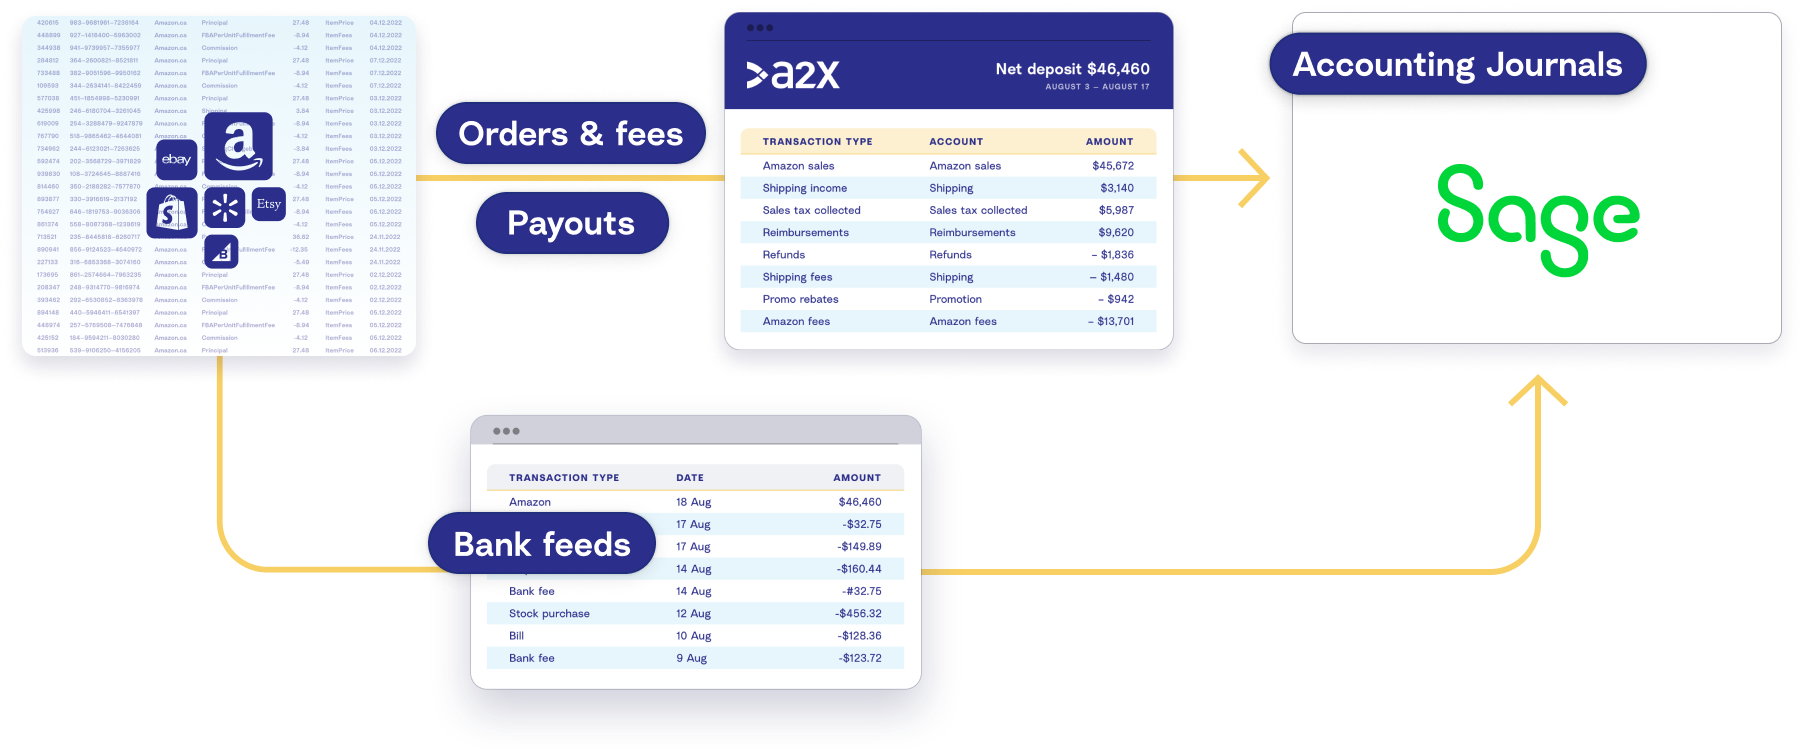 A diagram showing how A2X fetches sales data and summarizes it into accurate summaries that match with deposits in Sage